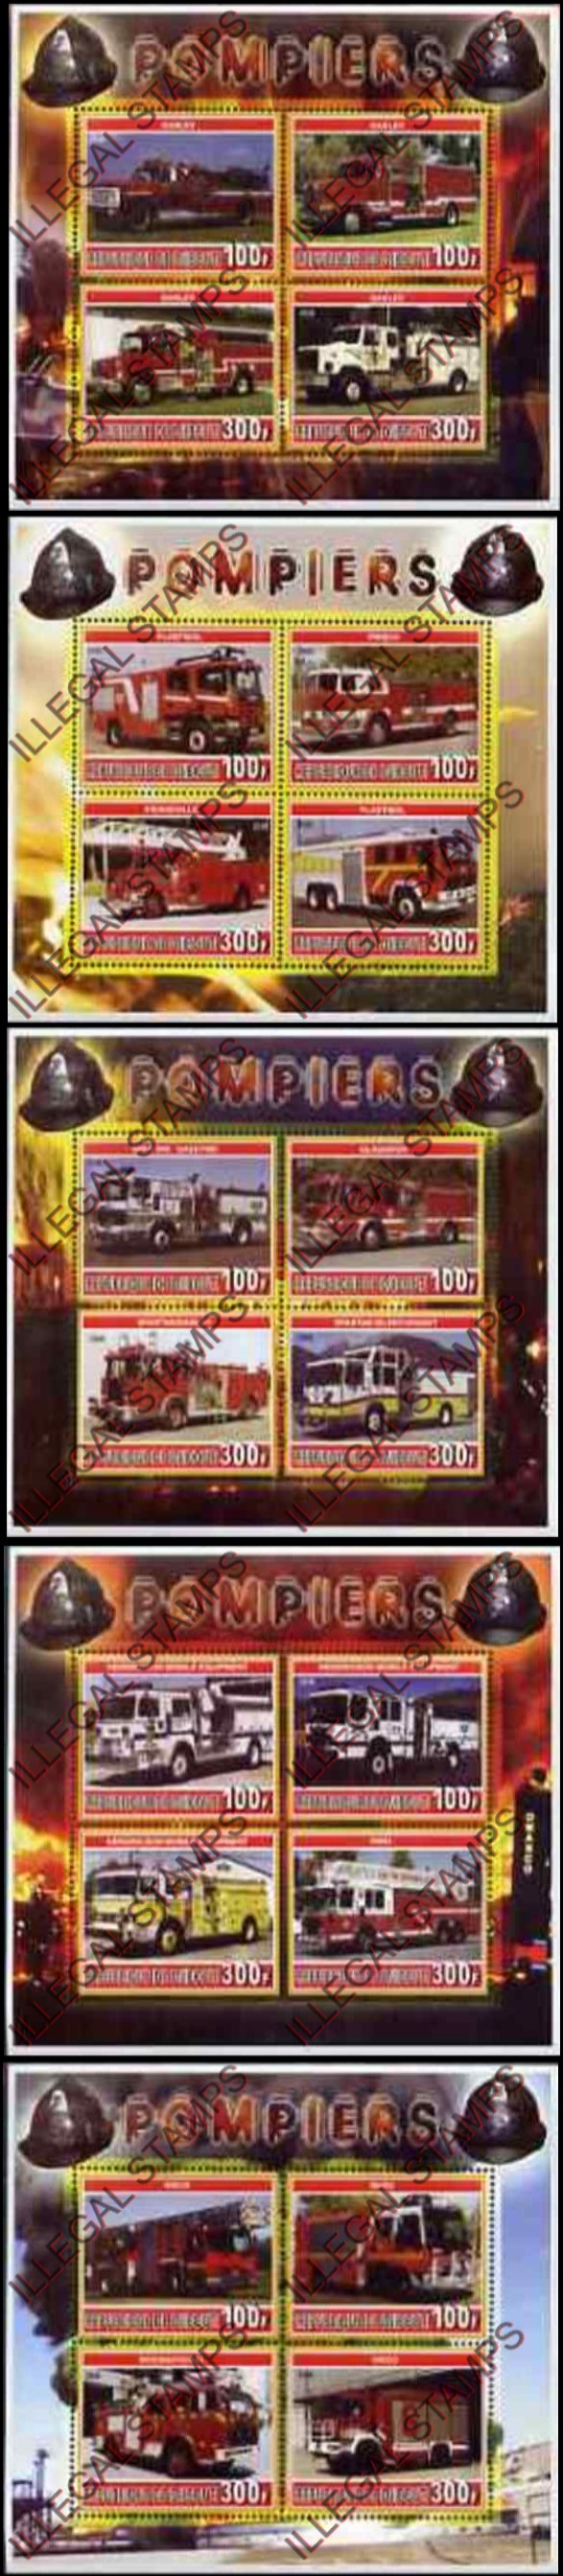 Djibouti 2006 Fire Engines Illegal Stamp Souvenir Sheets of 4